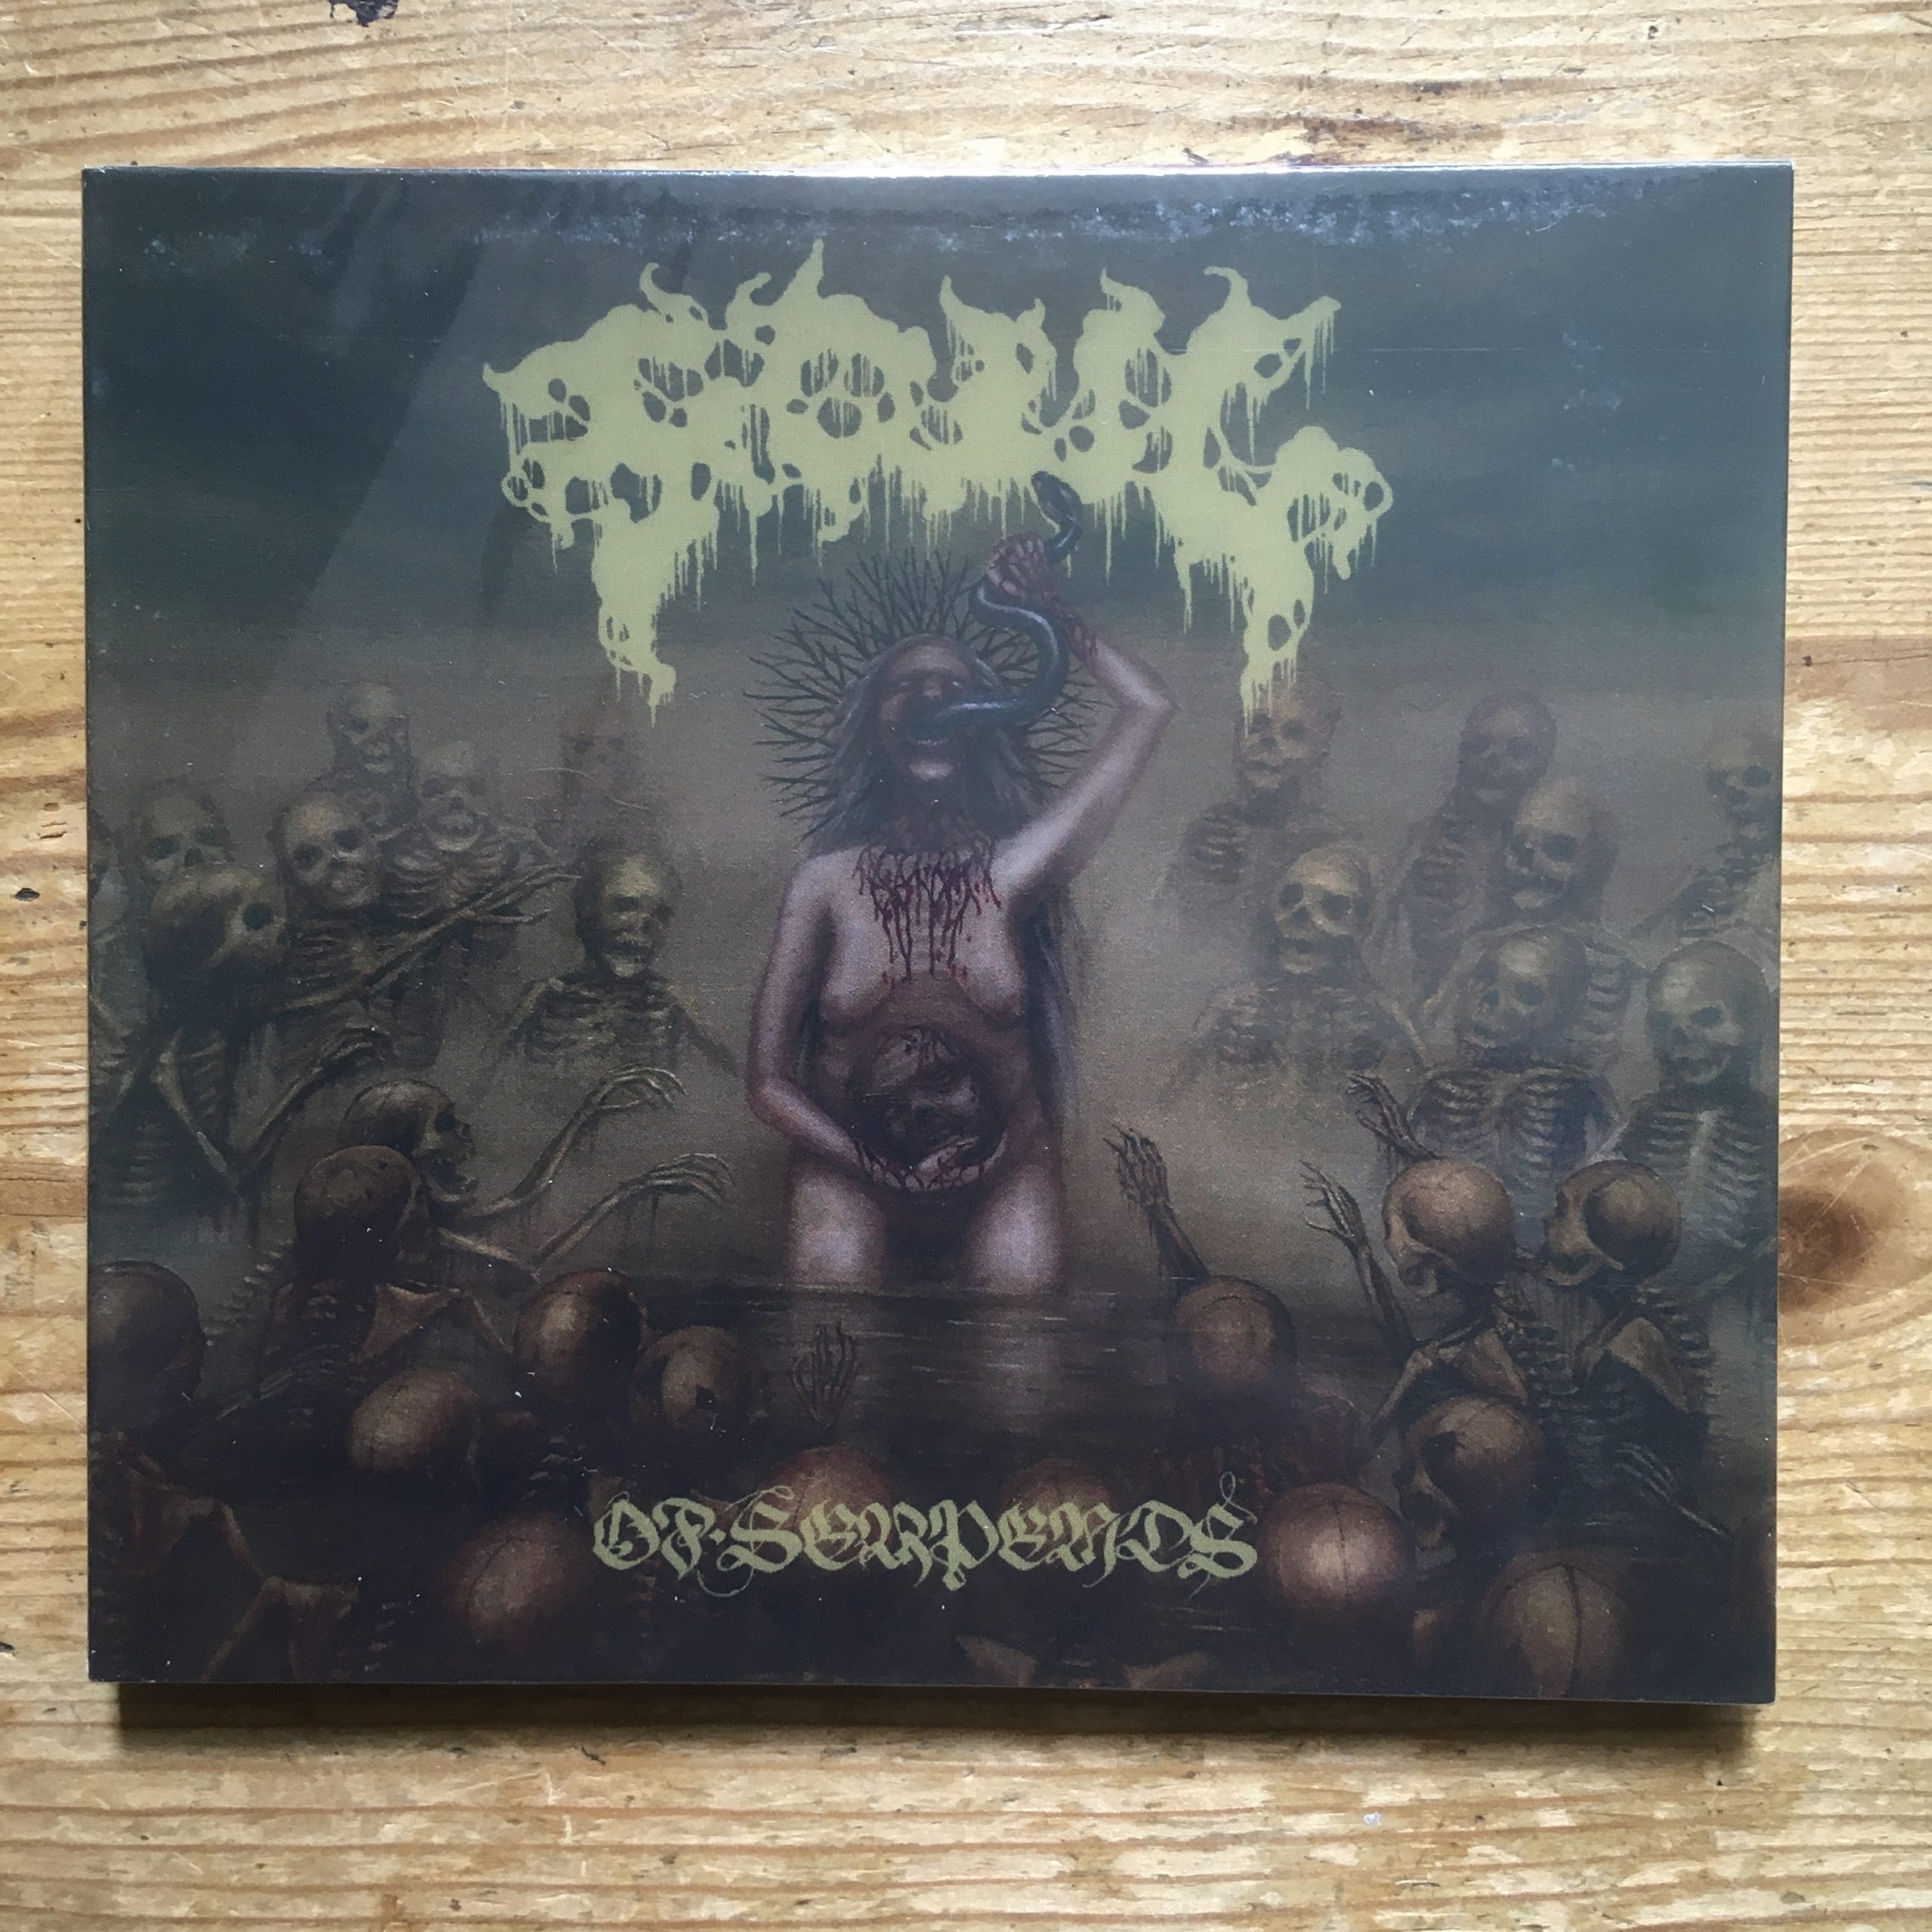 Photo of the Foul - "Of Serpents" CD